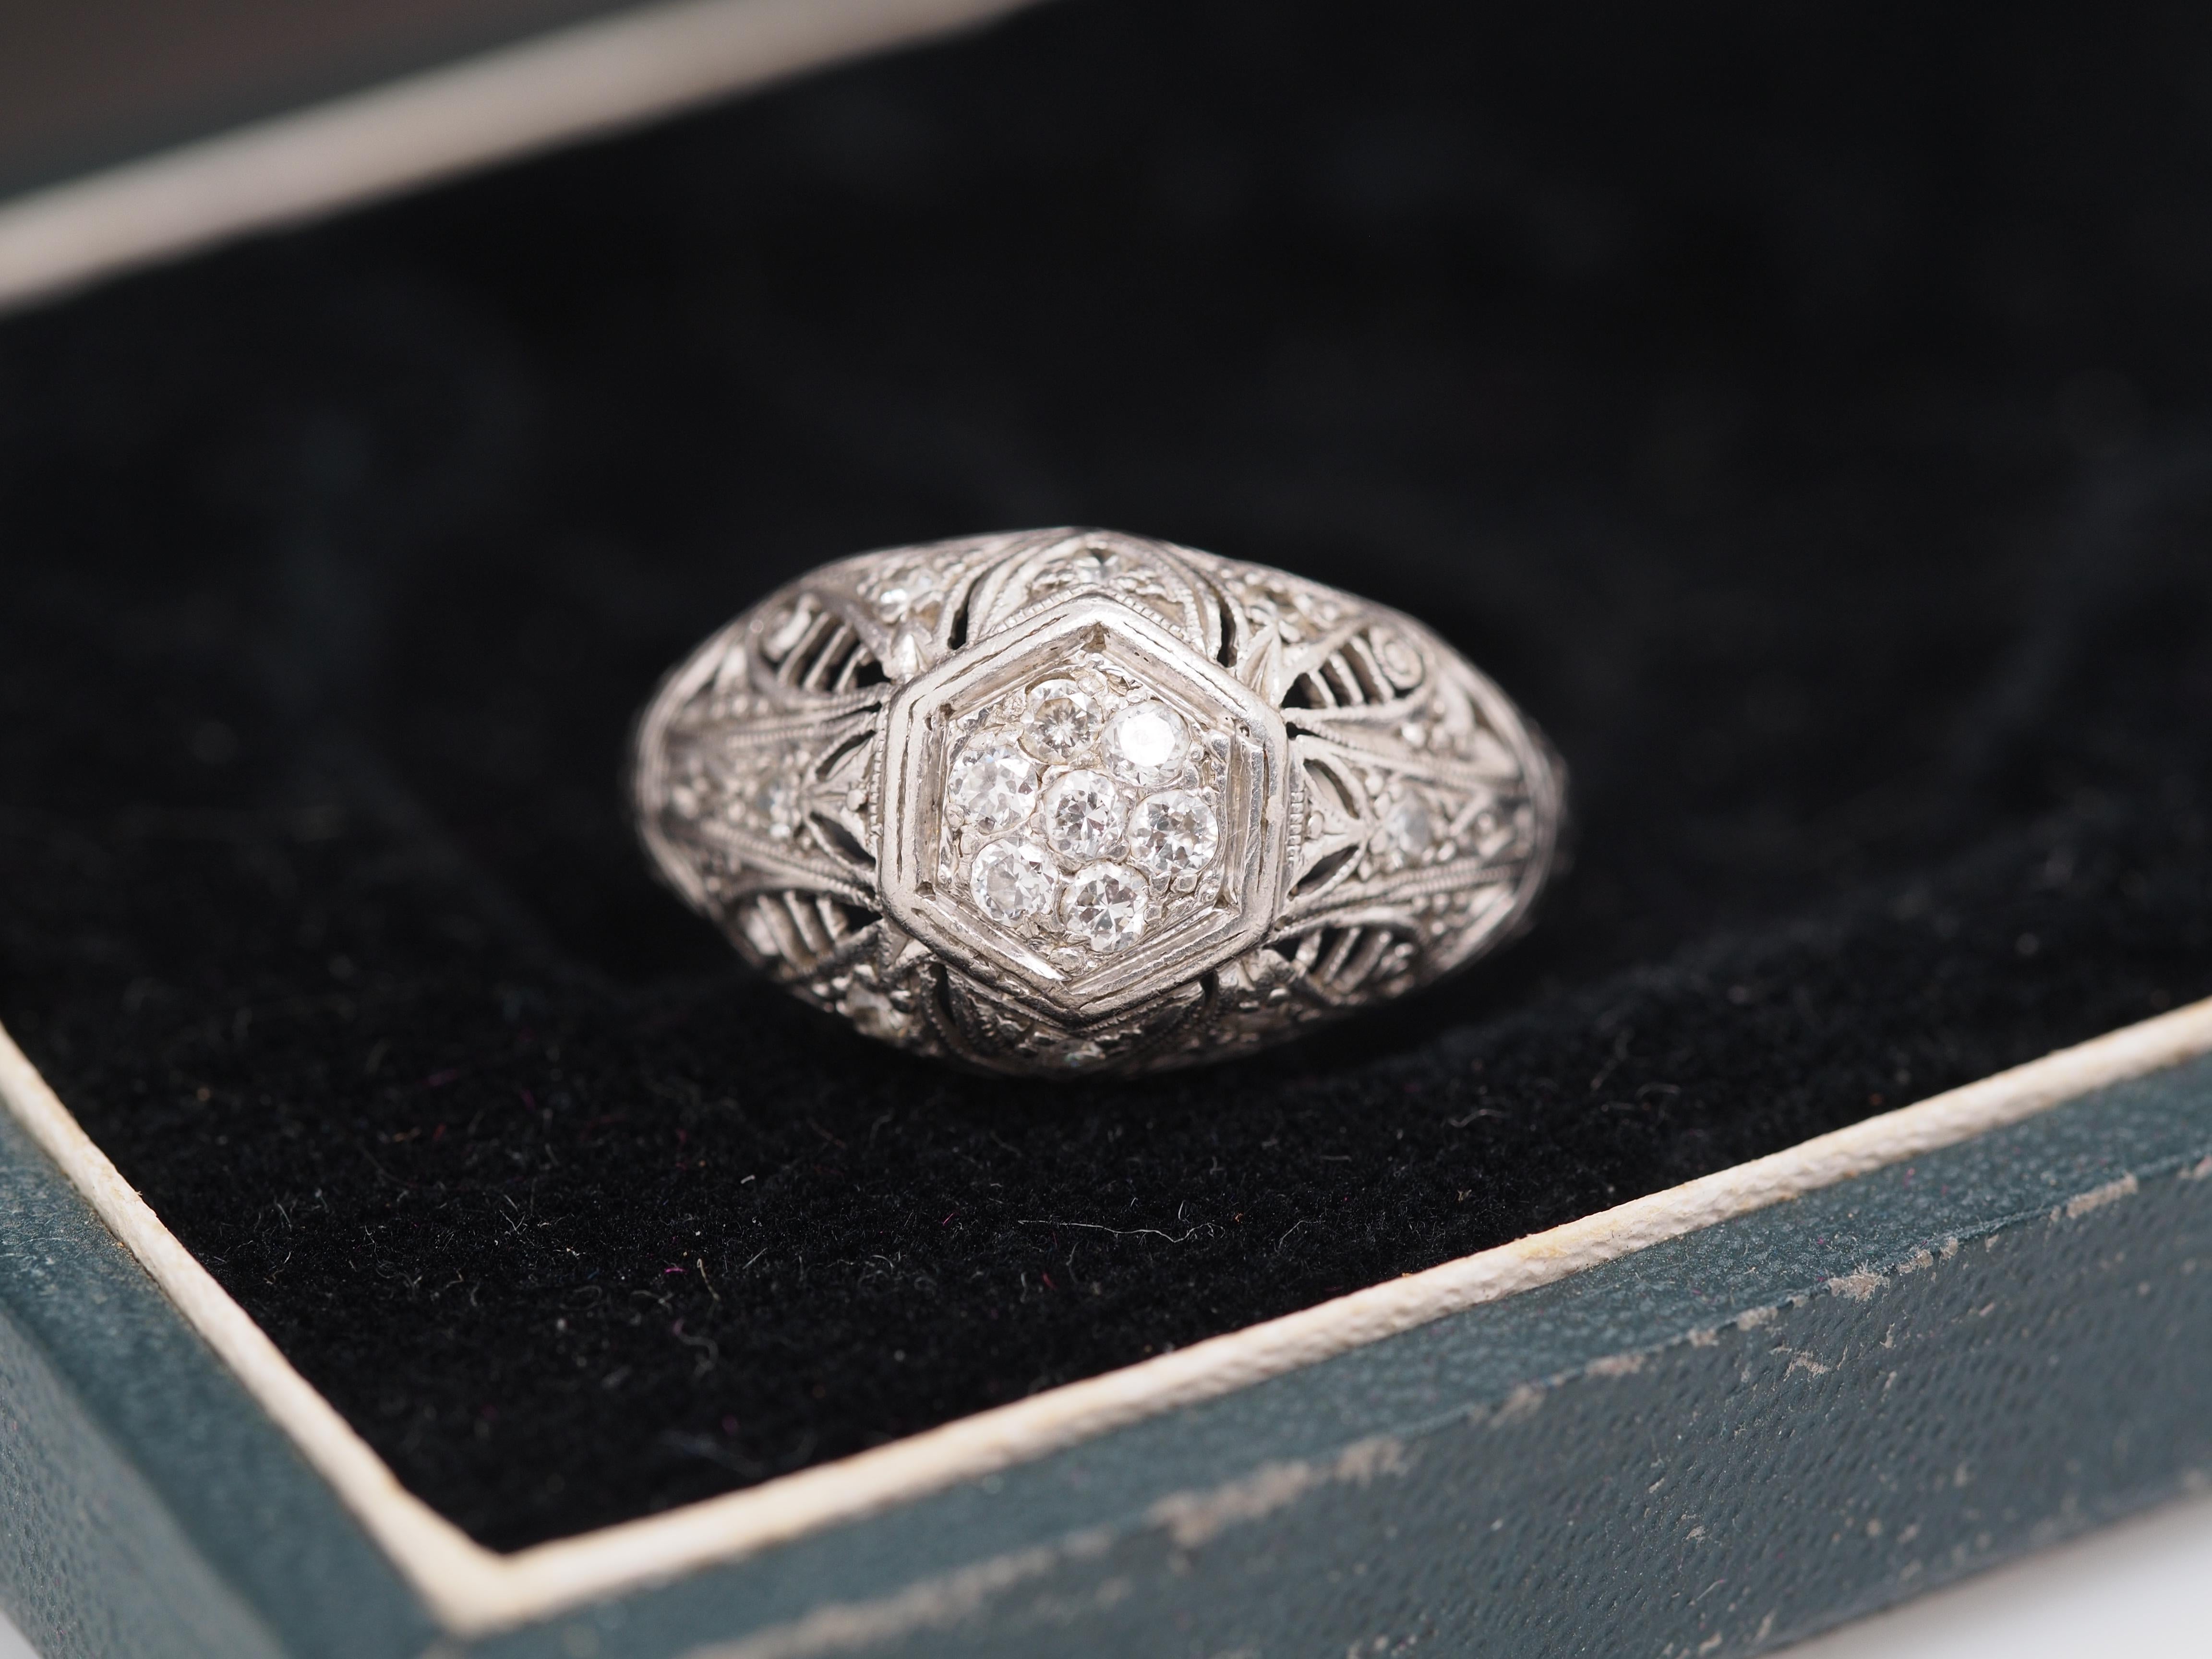 Year: 1920

Item Details:
Ring Size: 6.75
Metal Type: Platinum [Hallmarked, and Tested]
Weight: 4.2 grams

Diamond Details: Natural Diamonds, Old European Cut, .20ct total weight, G Color, VS Clarity

Band Width: 2.2 mm
Condition: Excellent

Price: